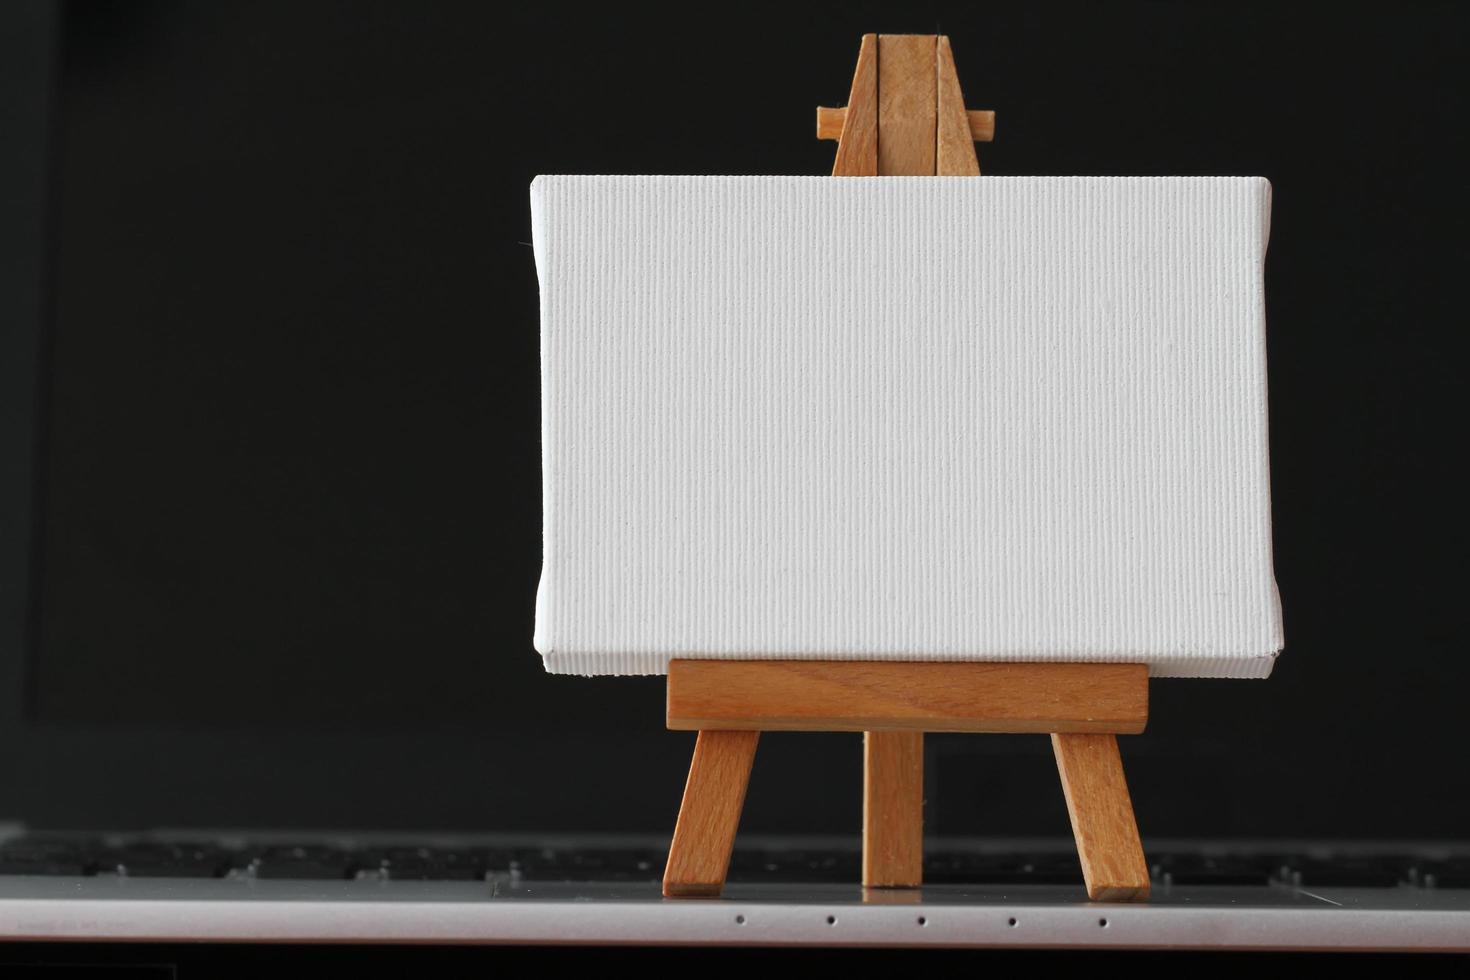 blank canvas and wooden easel on laptop computer as concept photo